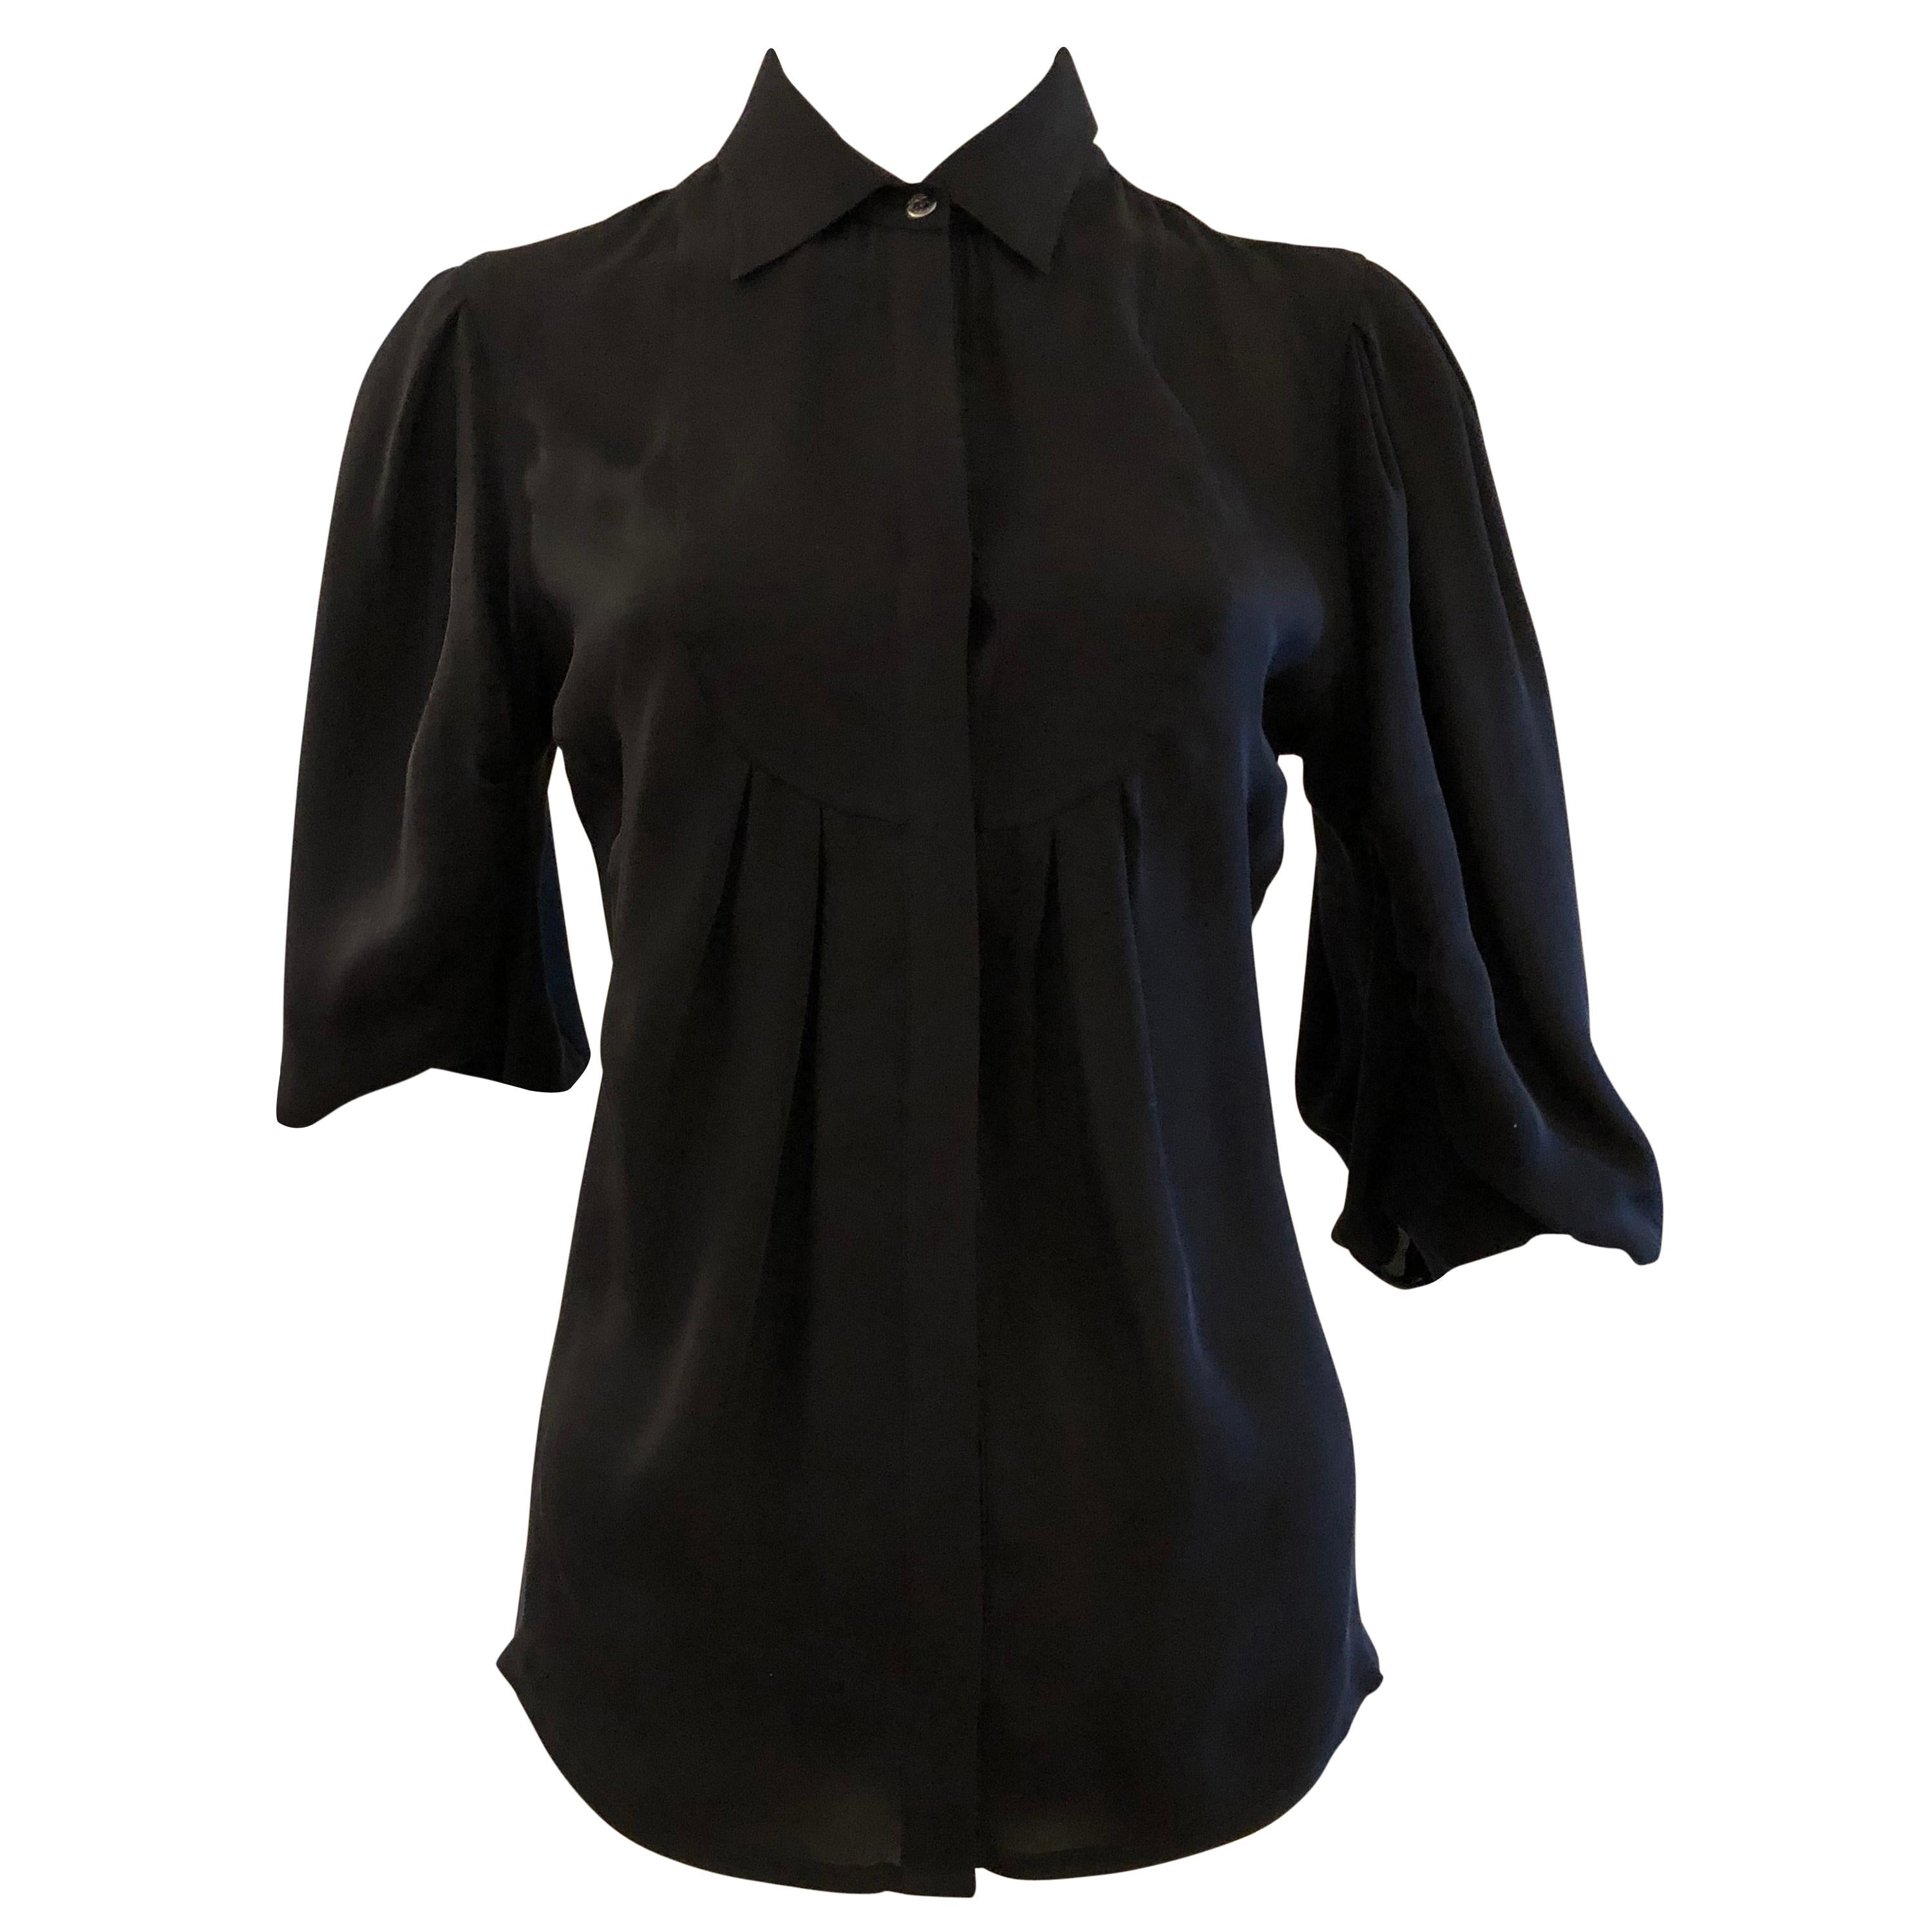 Versace Collection Silk Black "Poet" Blouse 42 Itl